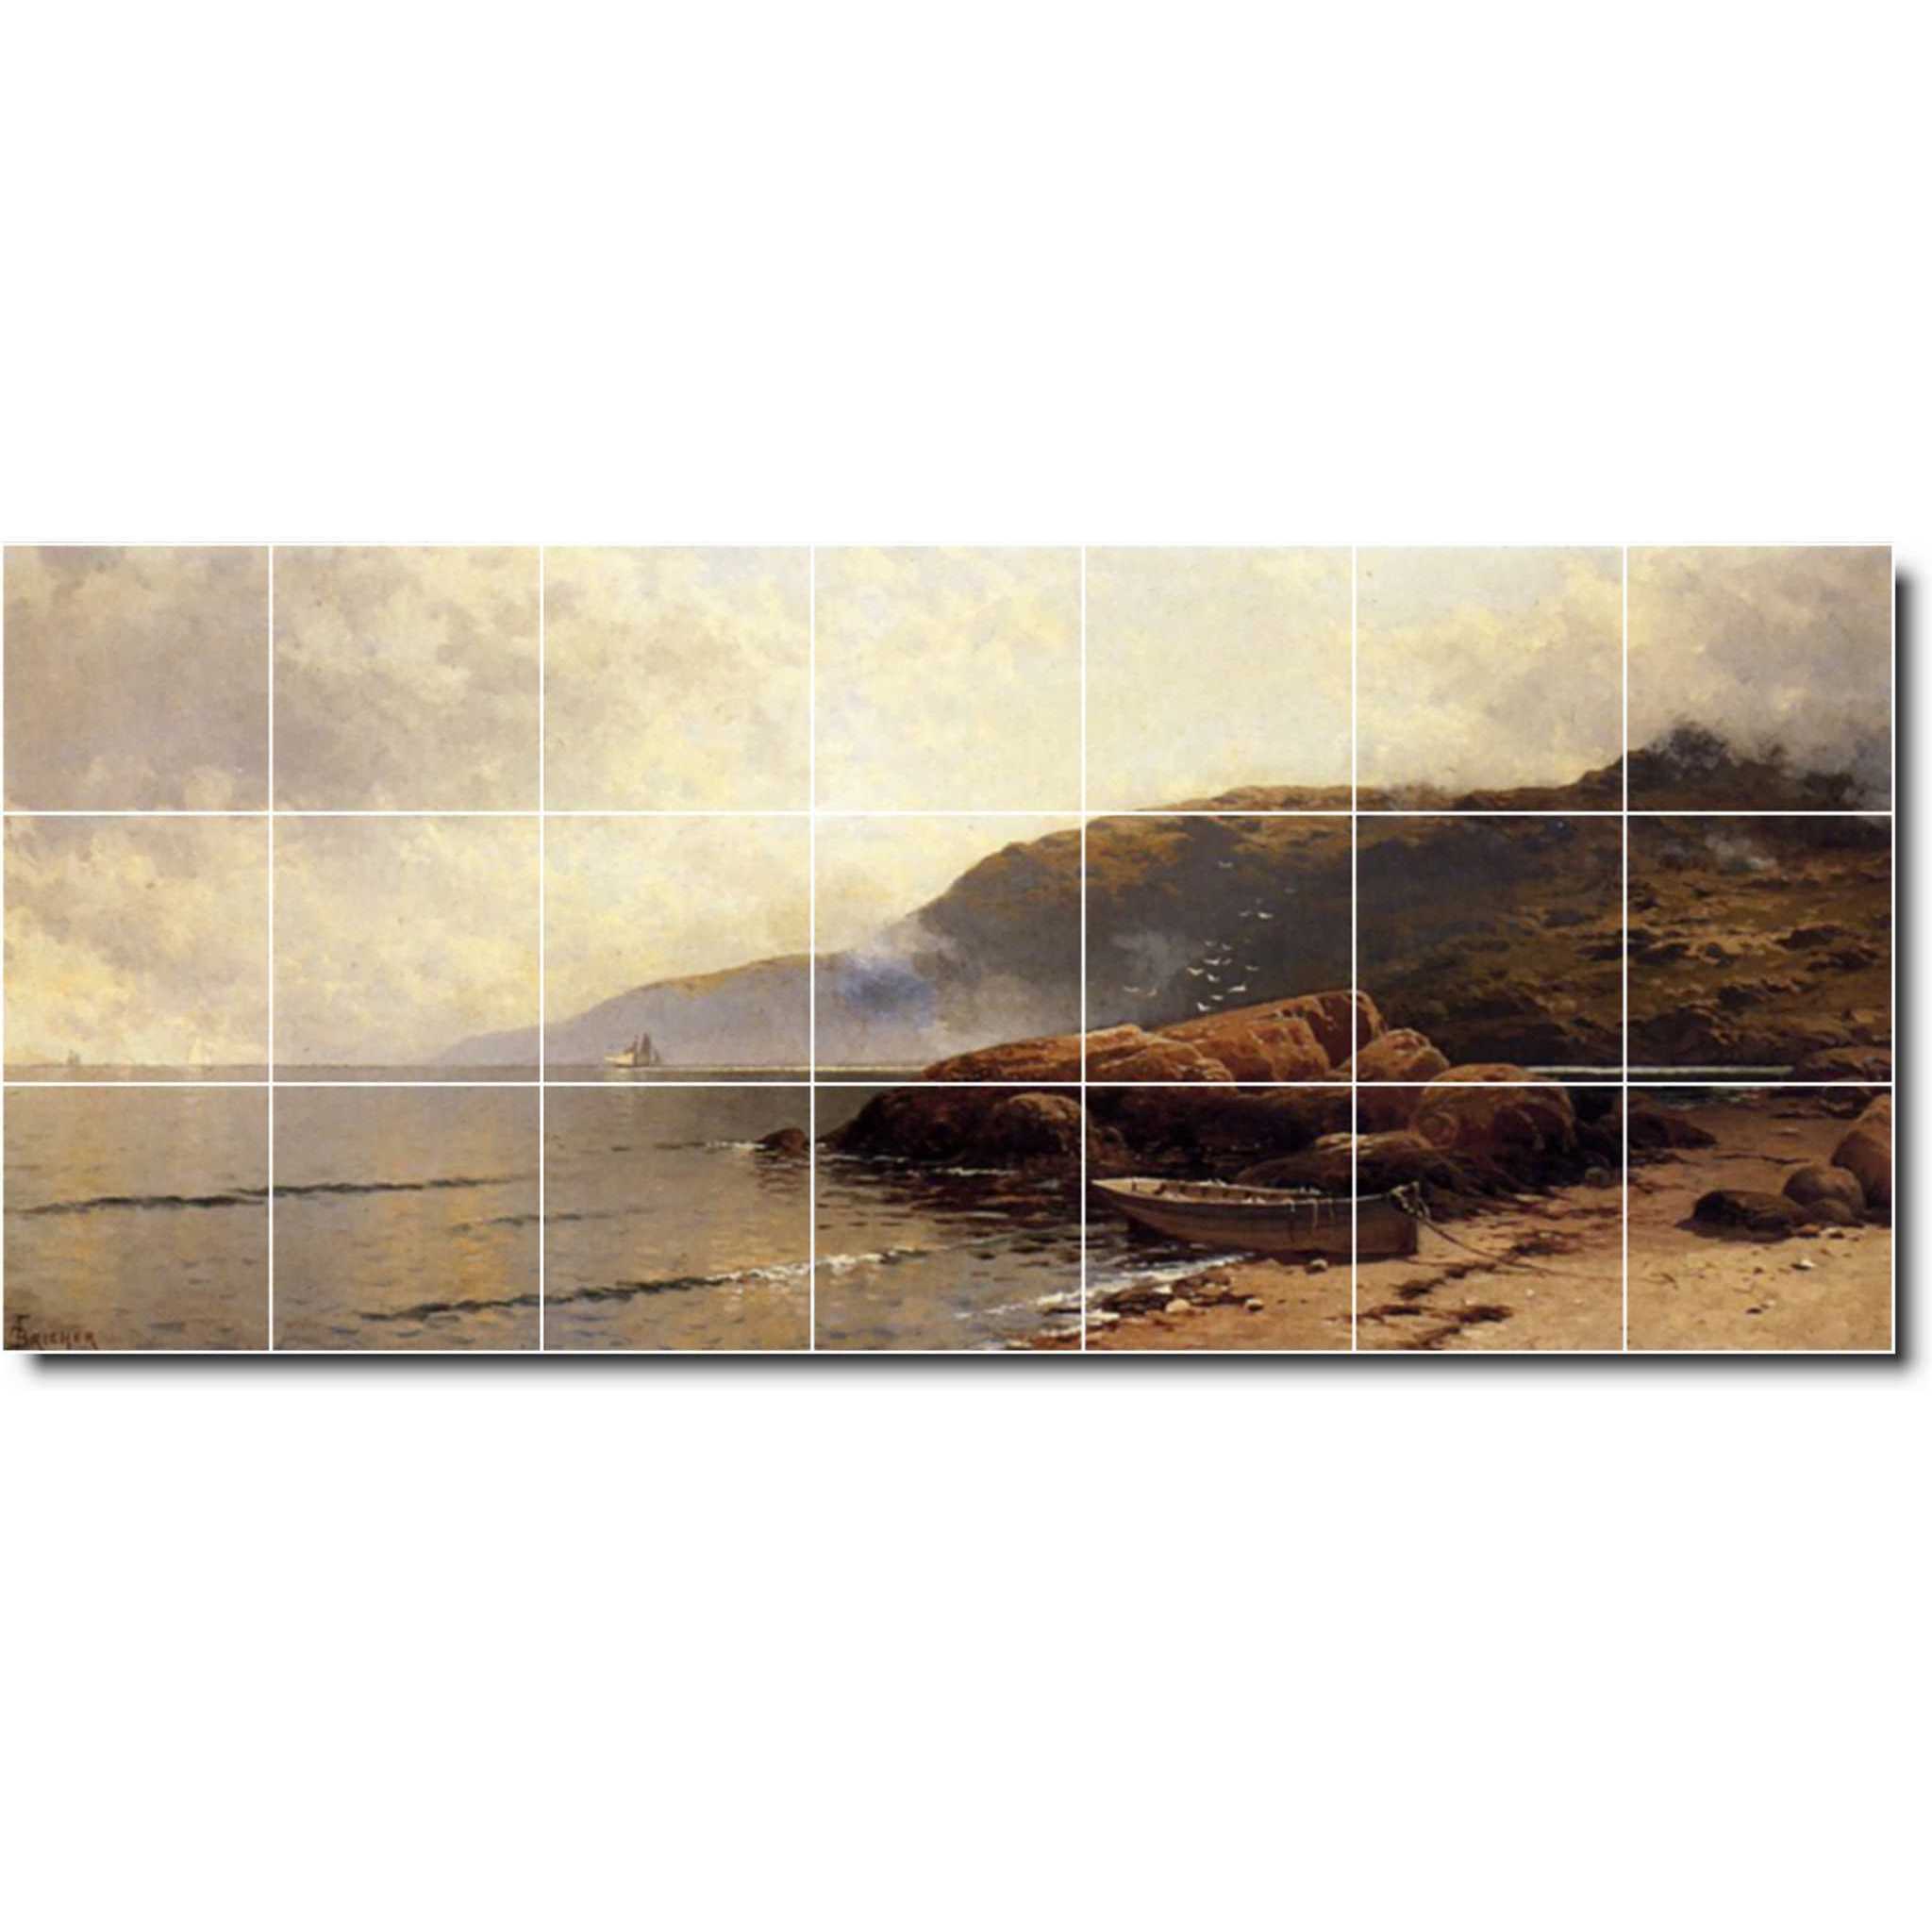 alfred bricher waterfront painting ceramic tile mural p01065